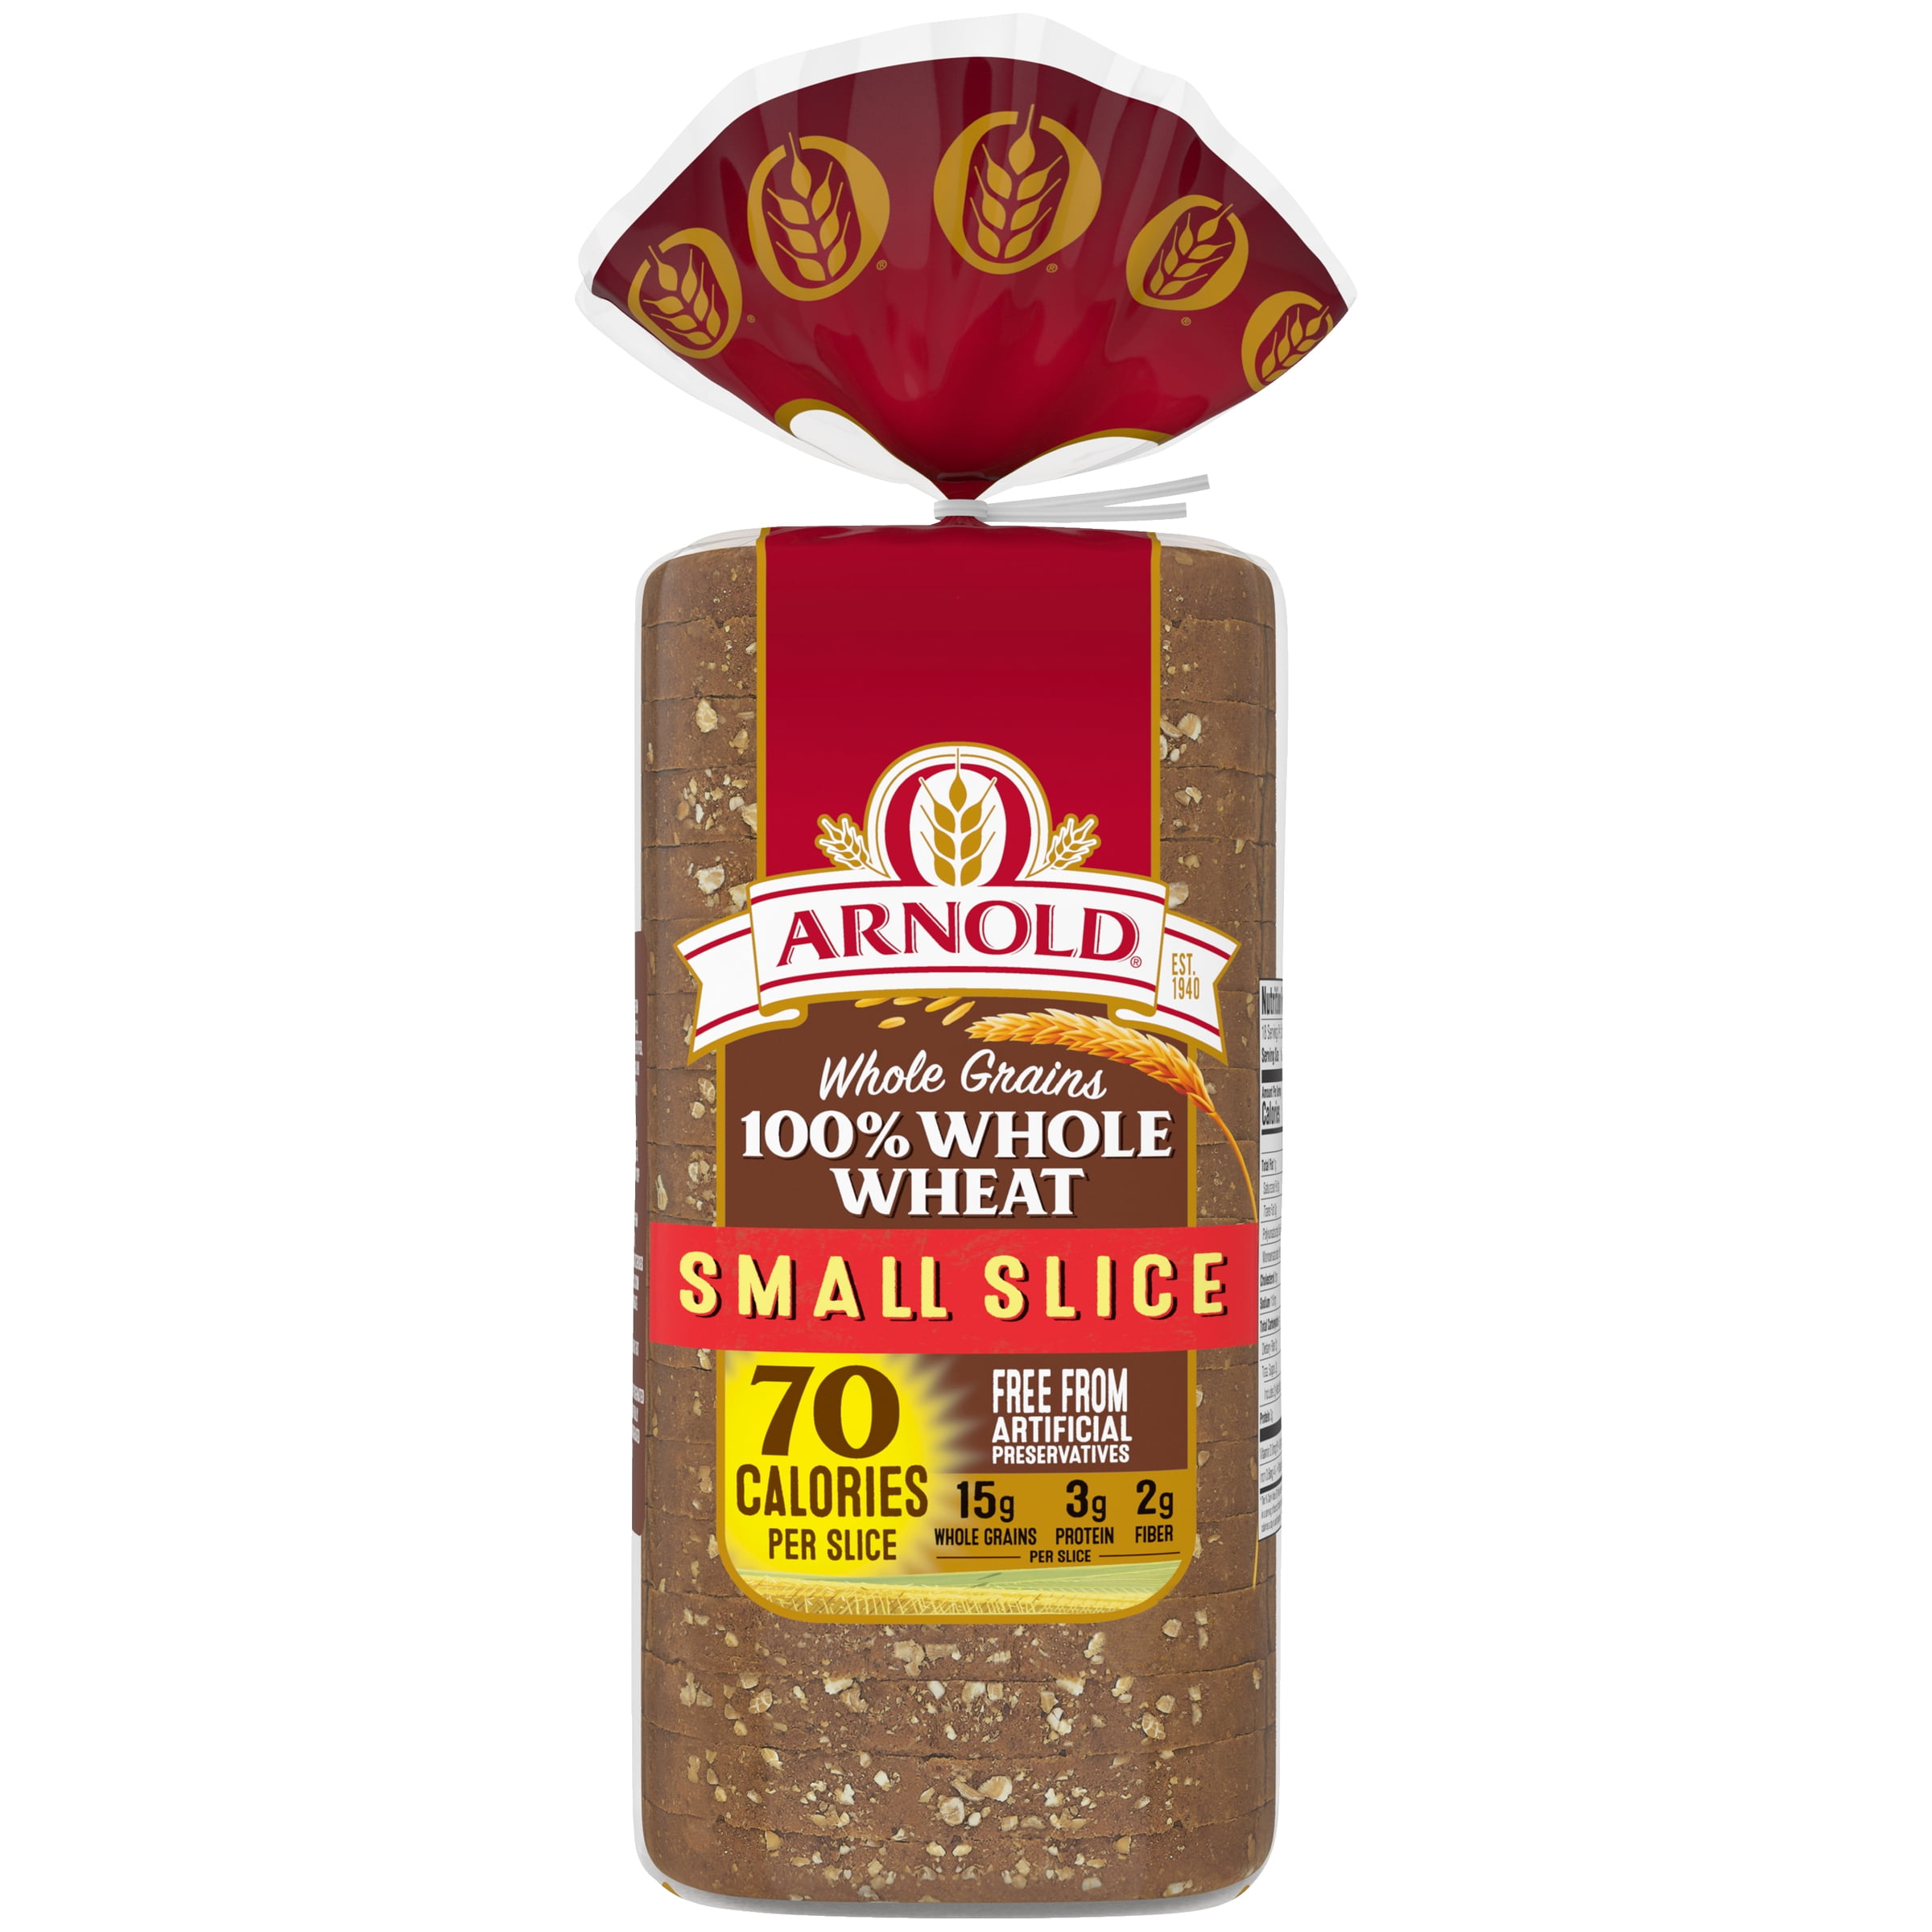 Arnold Whole Grains Small Slice 100% Whole Wheat Bread, Free from Artificial Preservatives, 18 Ounces